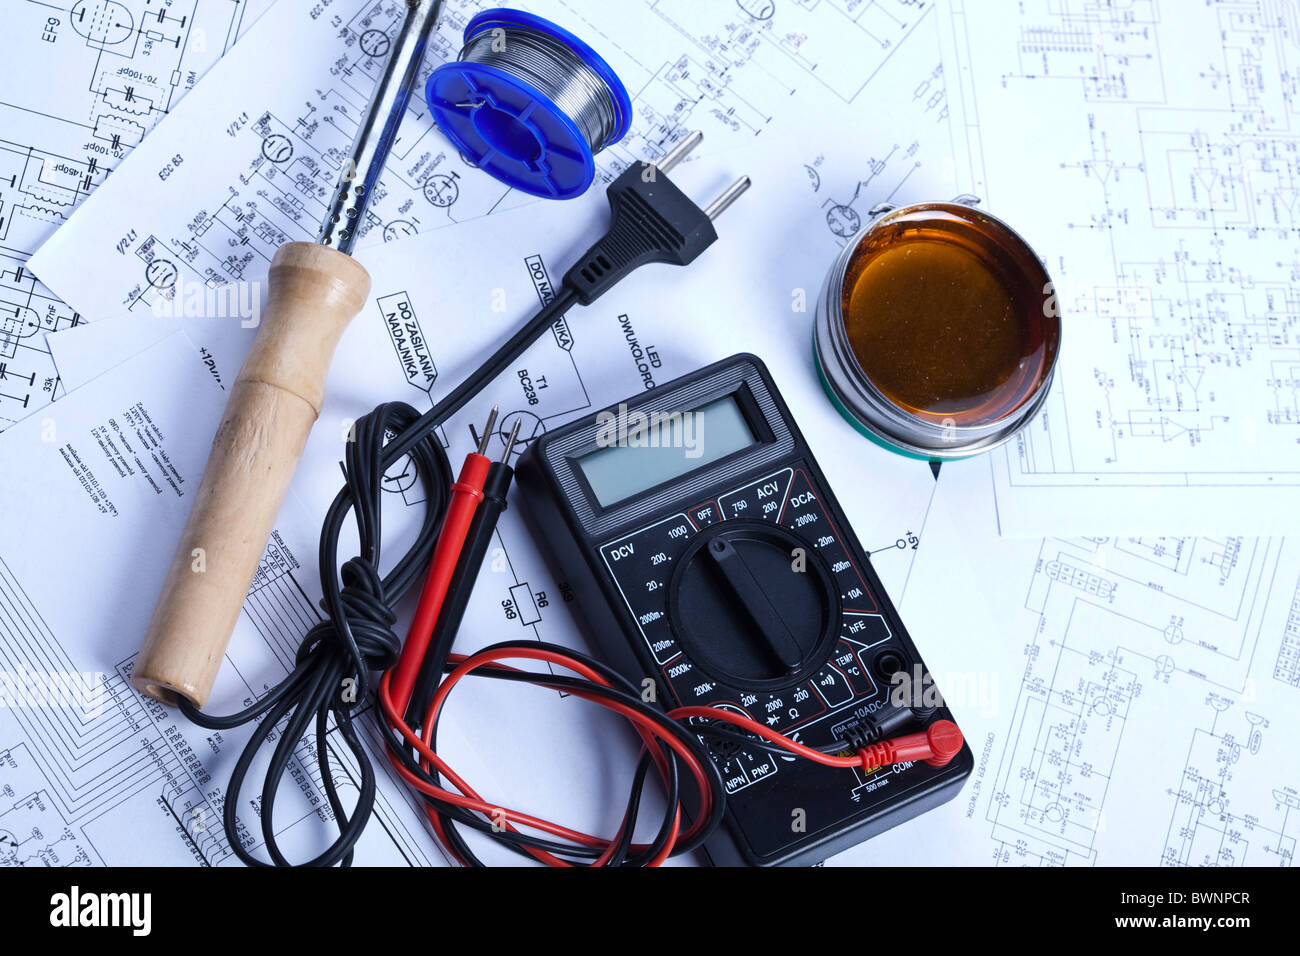 Electronic components on a schematic diagram background. Stock Photo